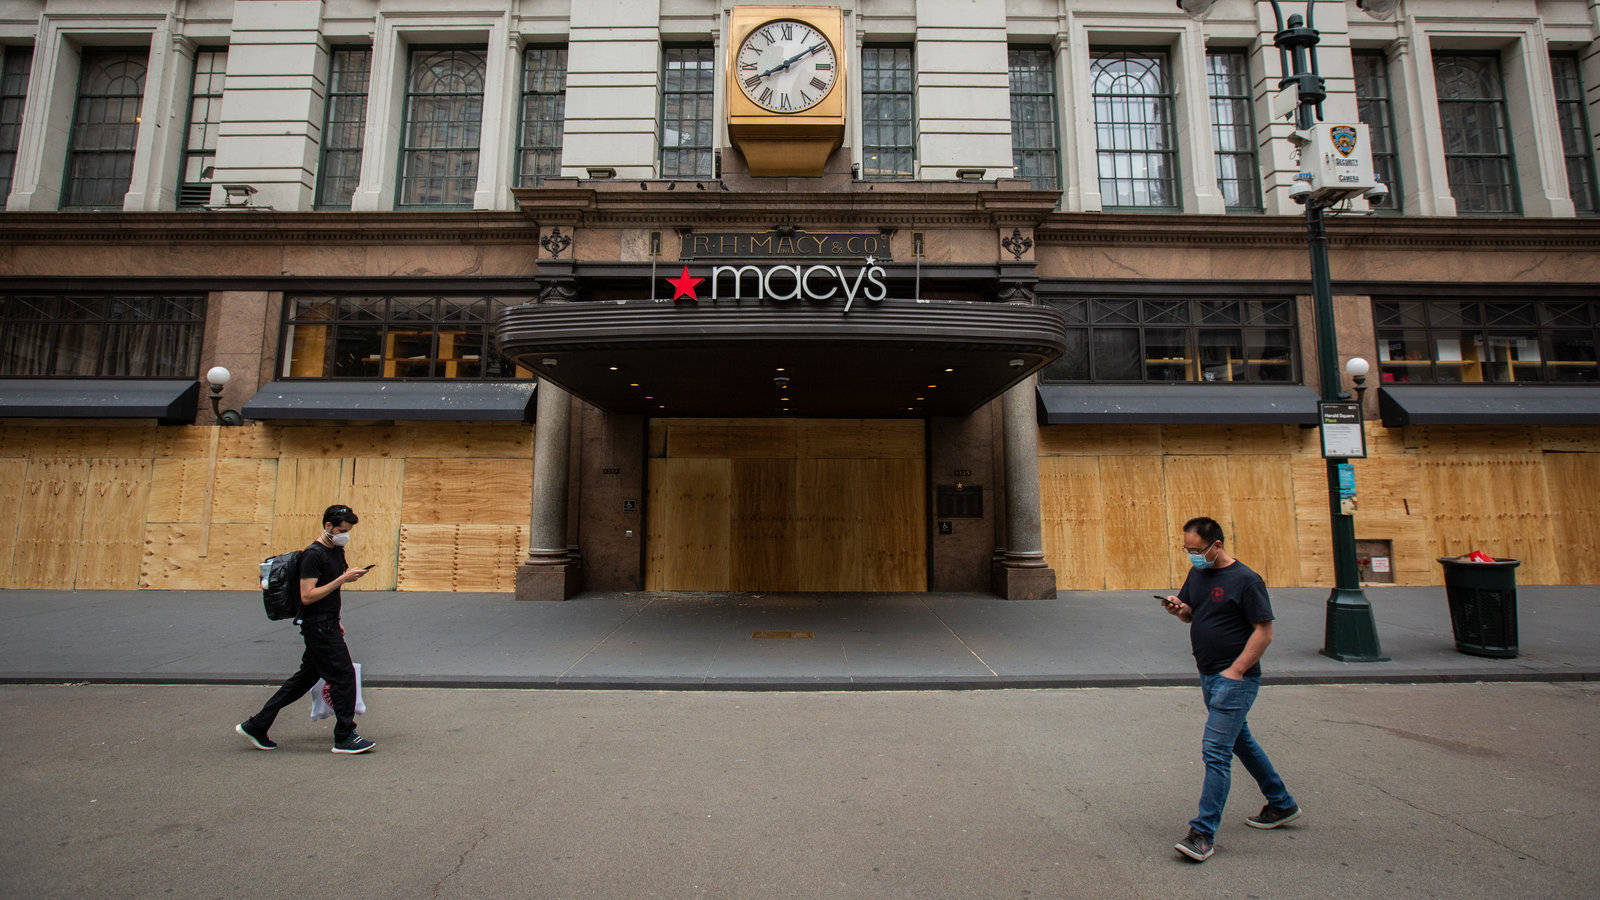 Macy's Boarded-up Storefront Background